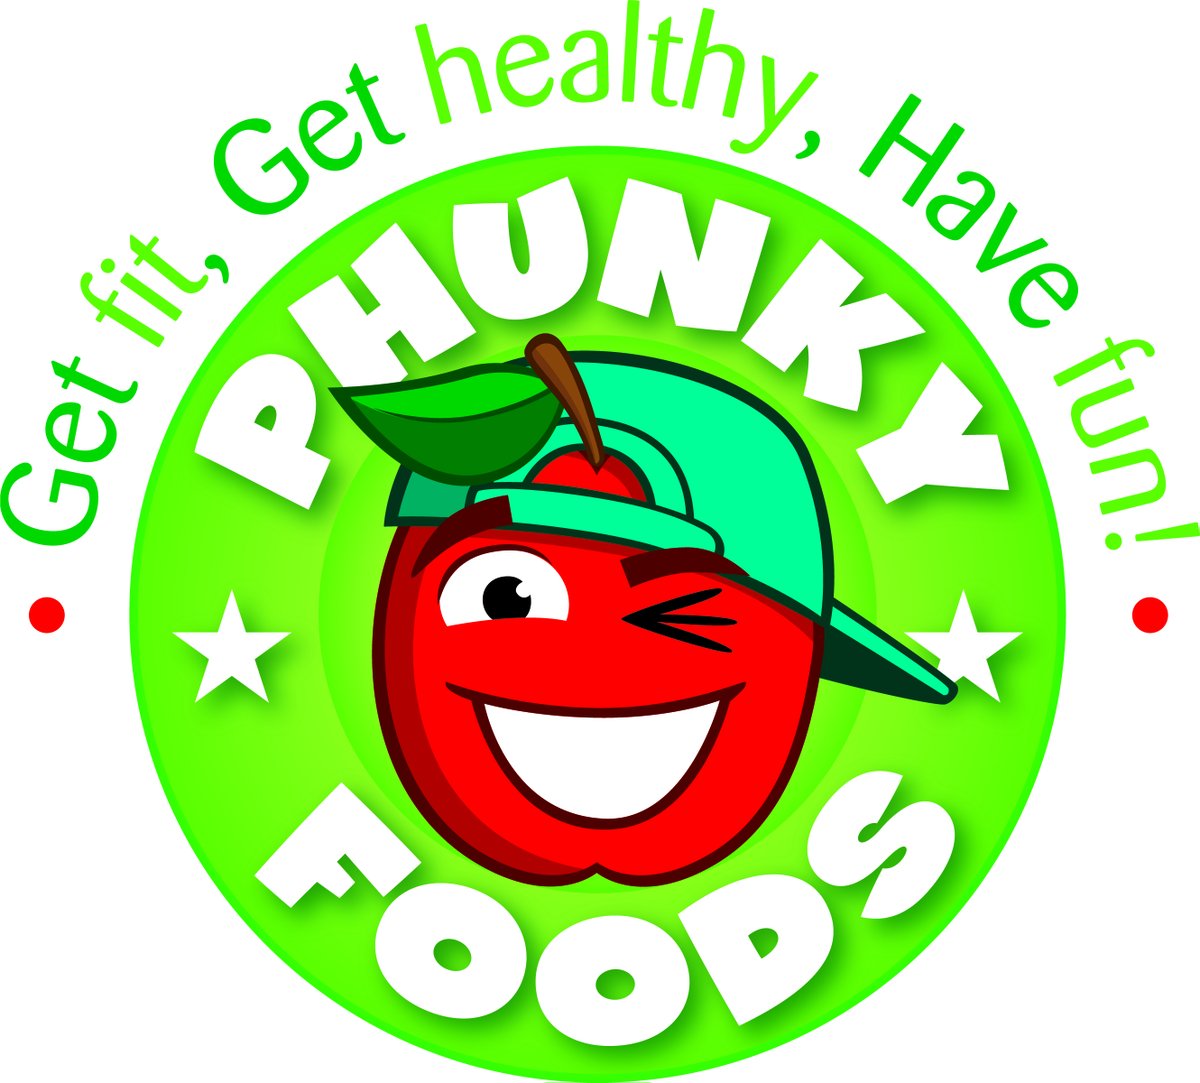 **Check out our latest PhunkyFoods newsletter... highlighting some of the fantastic things our team have been working on this past term - inspiring school case studies, new resources and the forthcoming Live training session for teachers!** ow.ly/BgPT50Rtna4